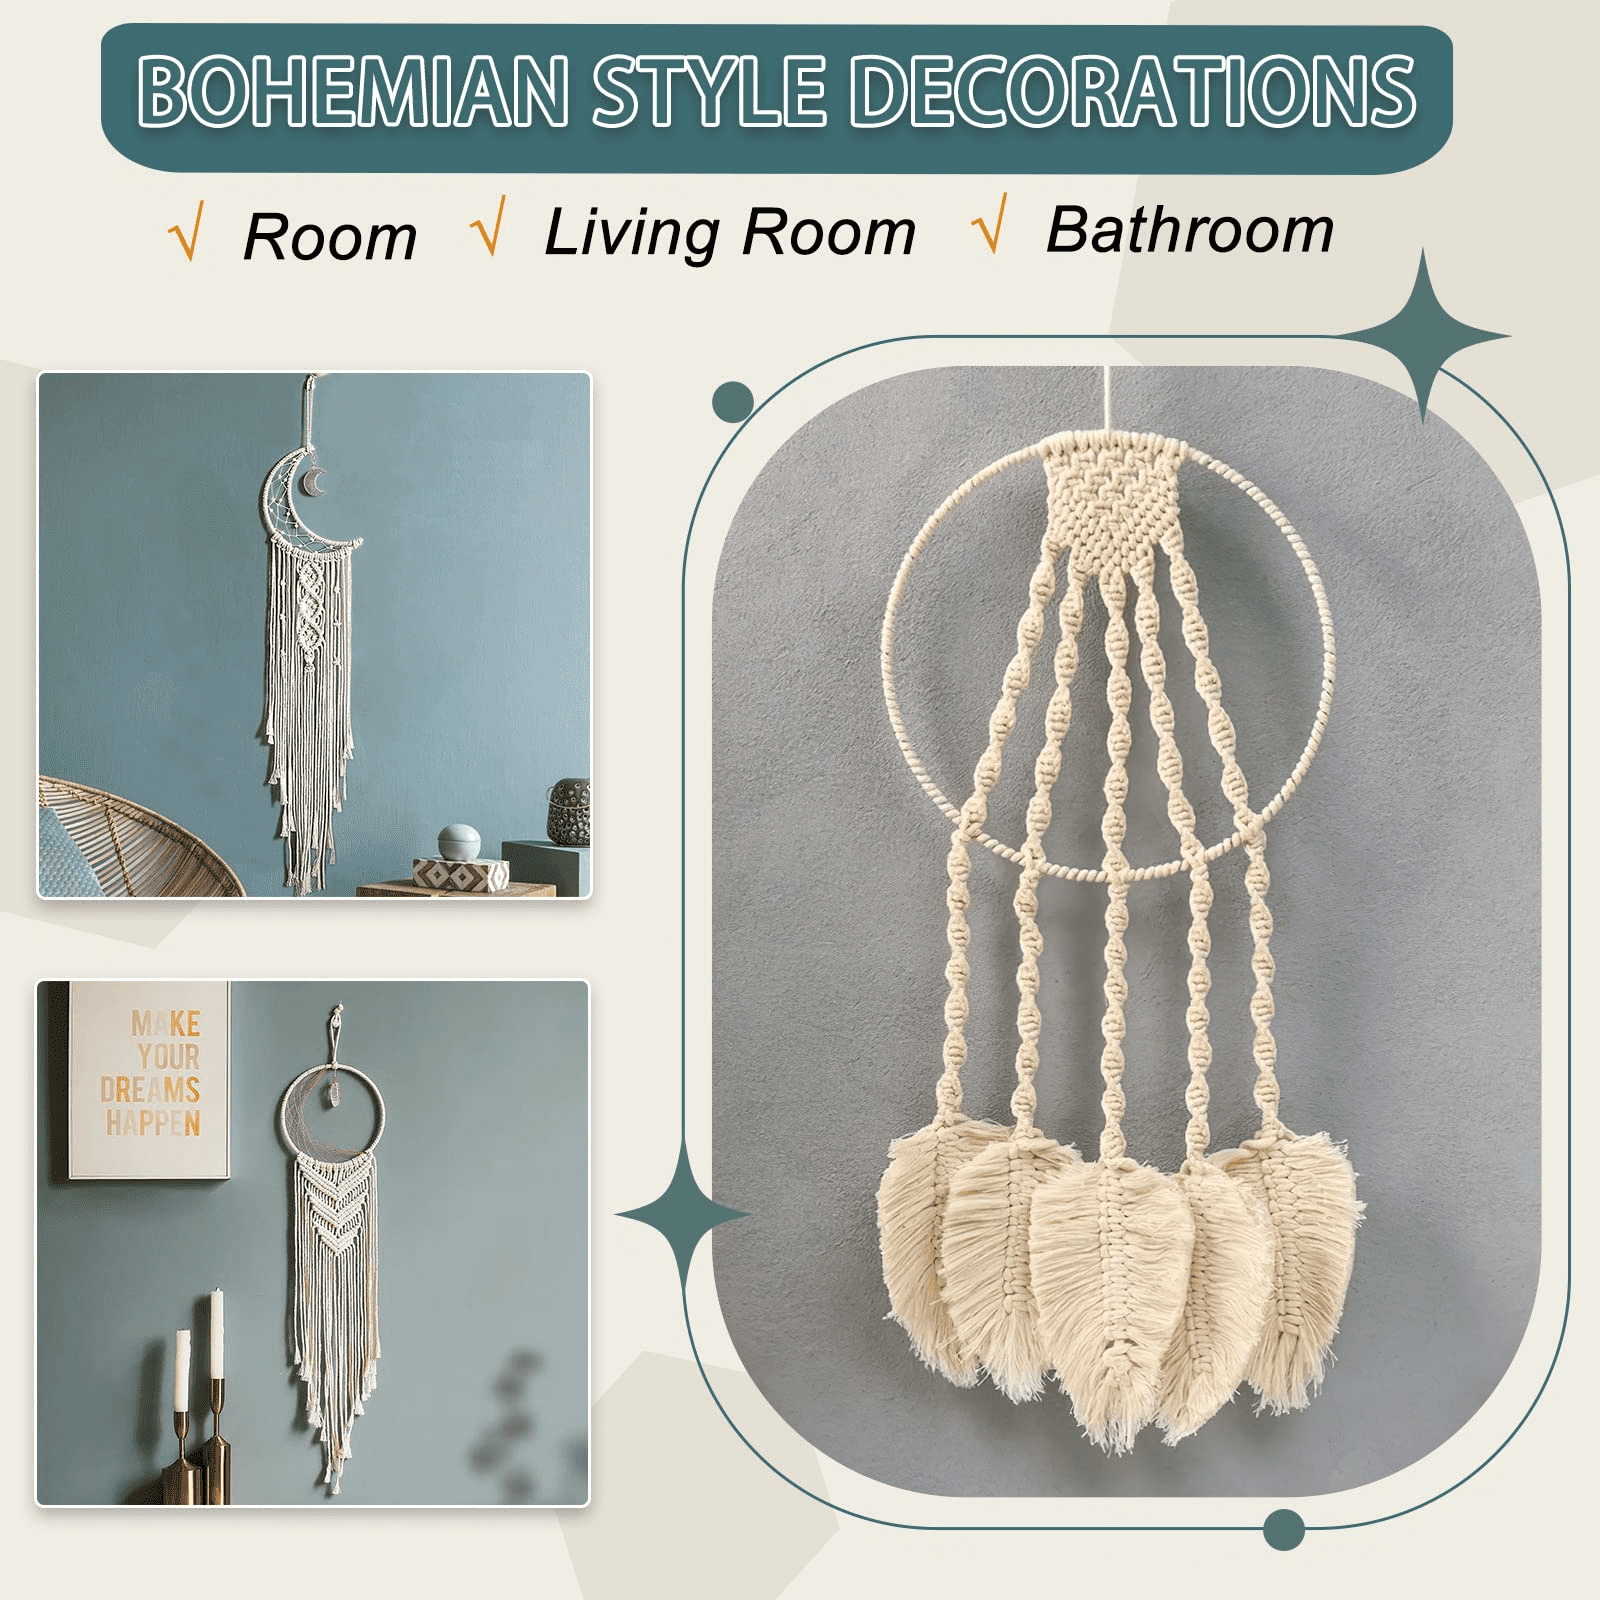 3 in 1 Macrame kit Adult Beginner: 3 DIY Christmas Macrame Tree, Crafts for  Adults, Macrame Cord 3mm, Boho Christmas Decor, Macrame Kits for Adults  with Written Instructions and Video Tutorials